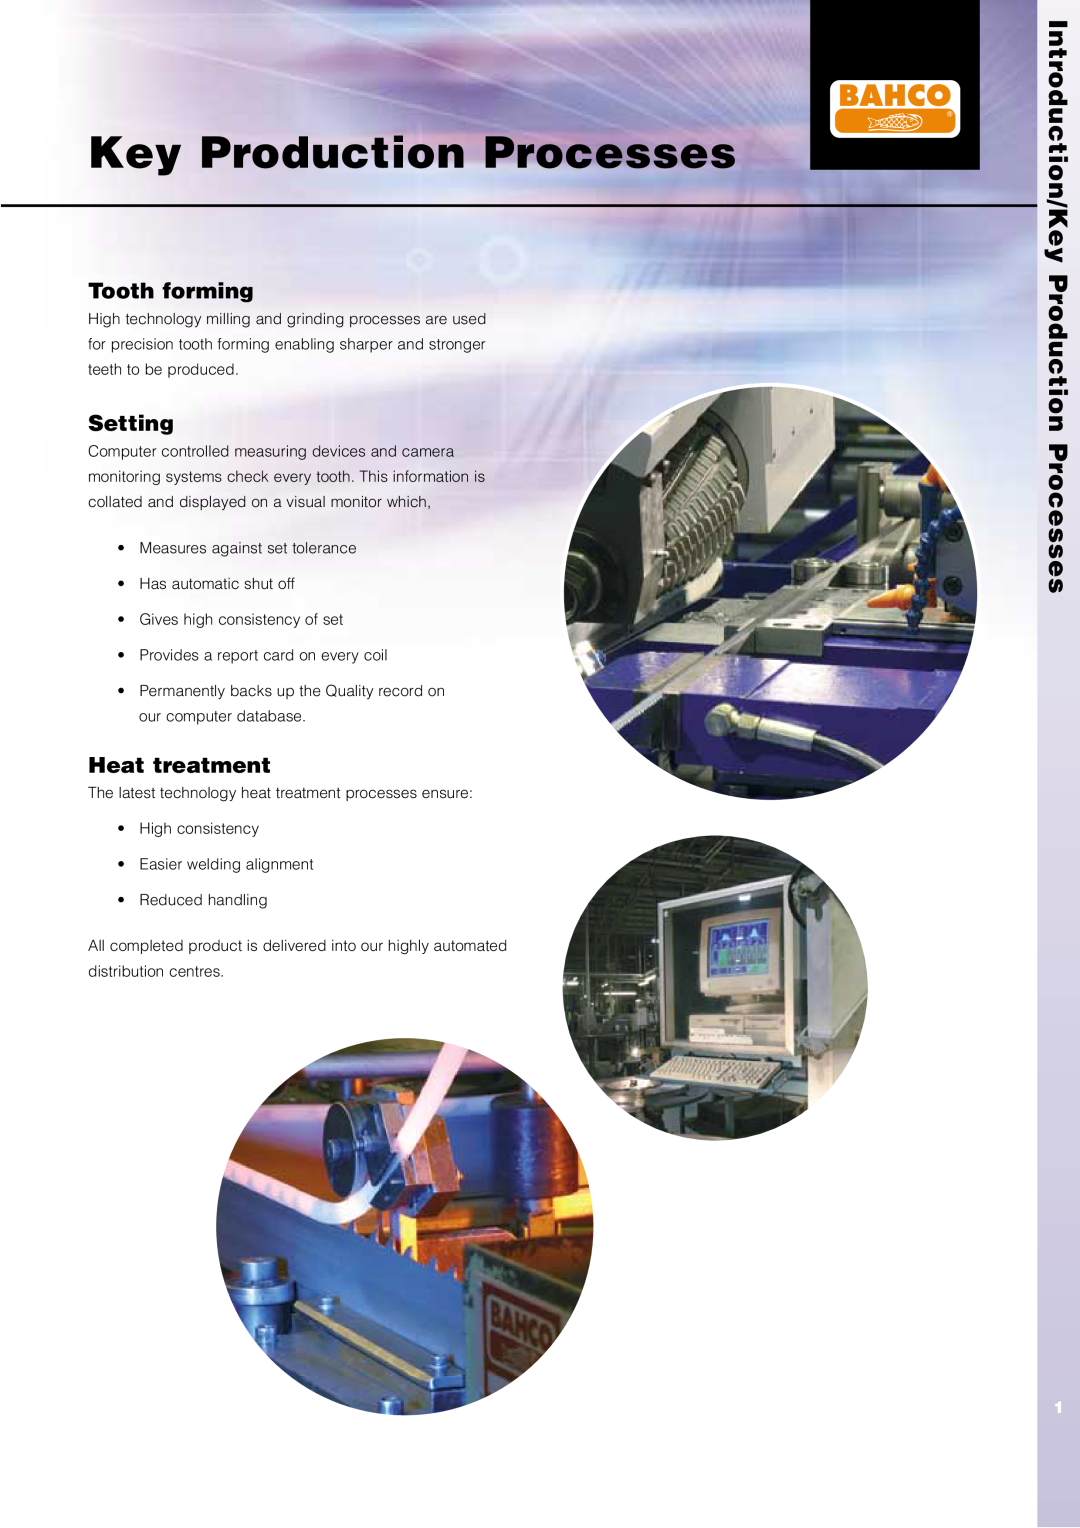 Bahco Saw manual Introduction/Key Production Processes, Tooth forming, Setting, Heat treatment 